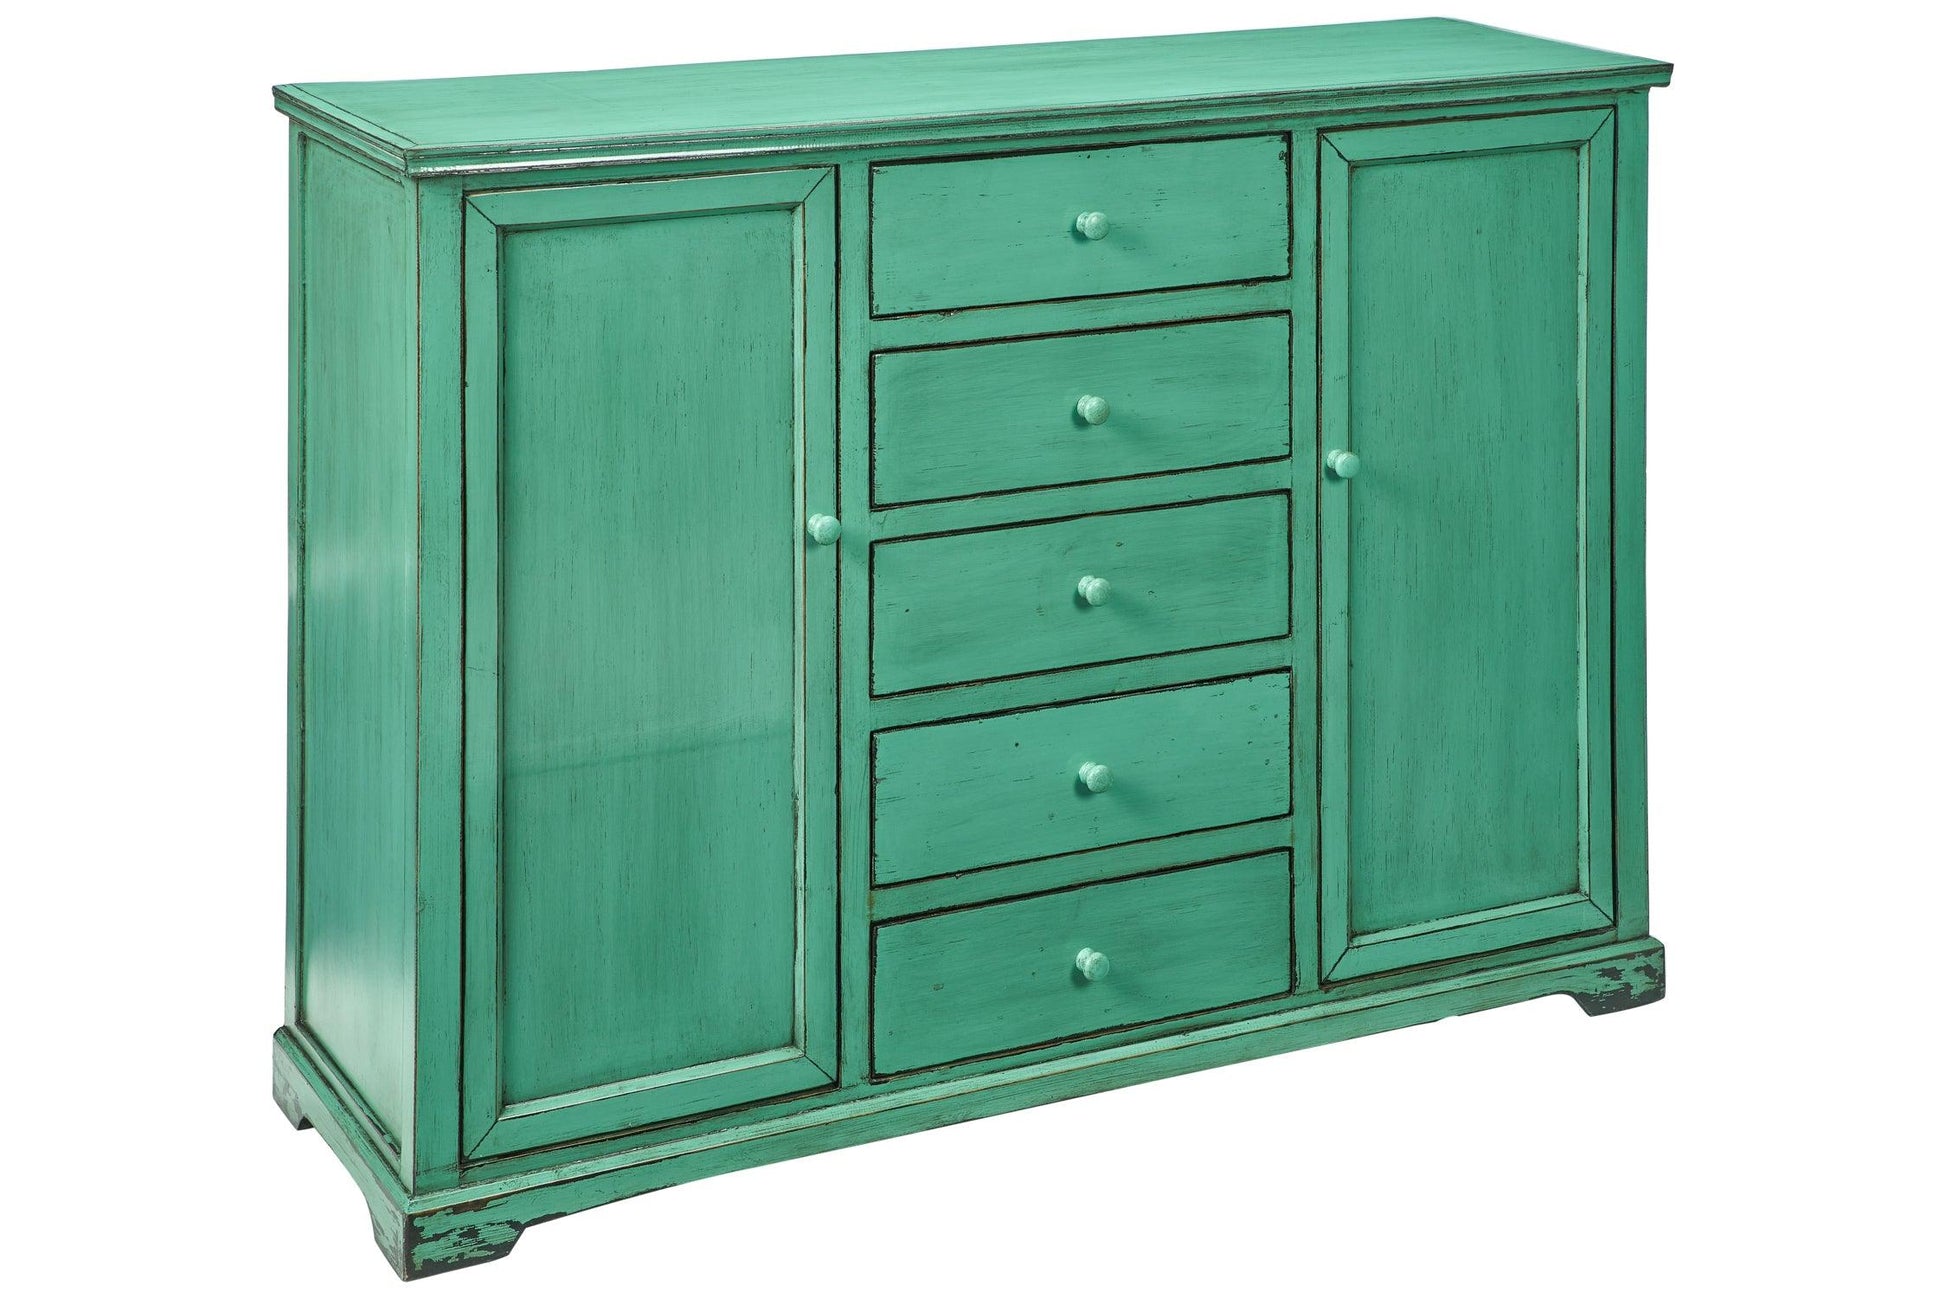 Credenza cinese in Olmo lacca verde 2a 5c - lapagoda.net